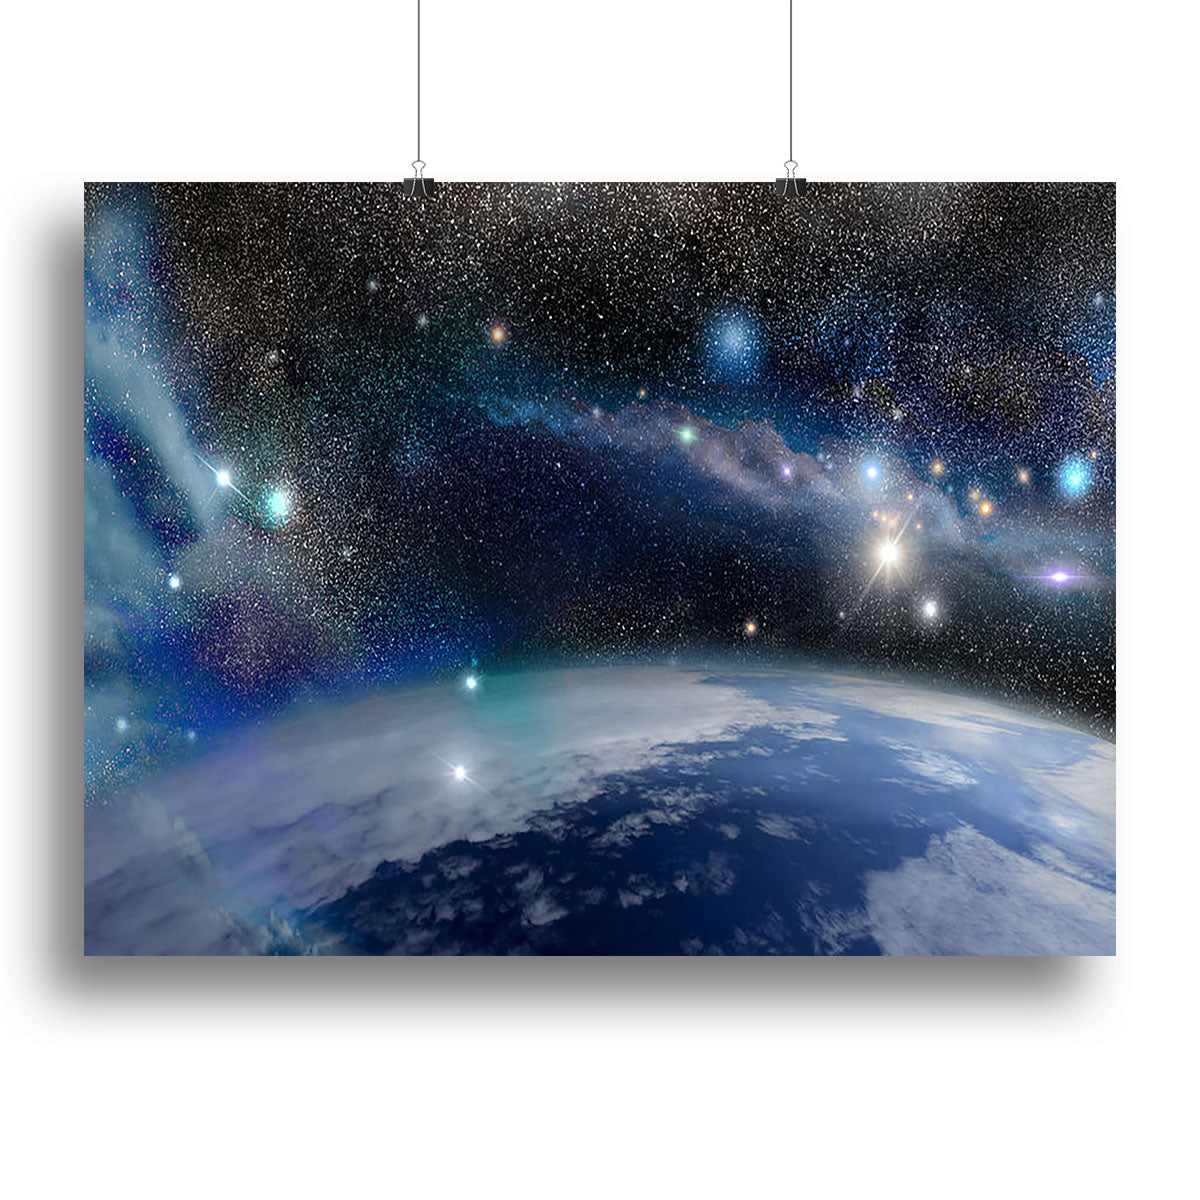 Earth in a Cosmic Cloud Canvas Print or Poster - Canvas Art Rocks - 2